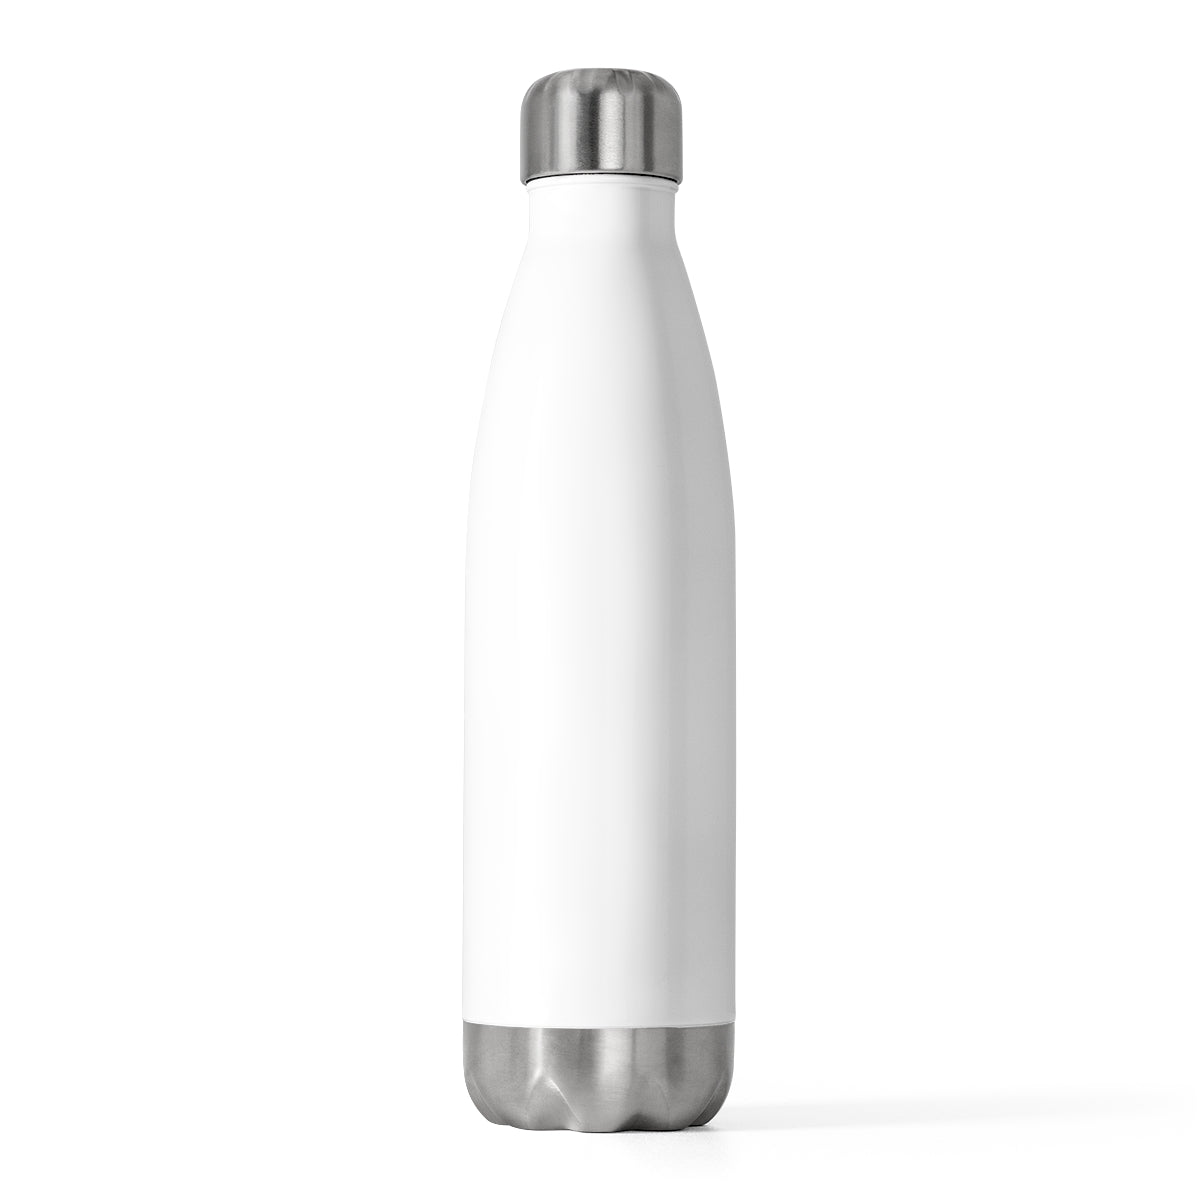 Blind to the World But His Greatest Treasure Insulated Bottle Printify